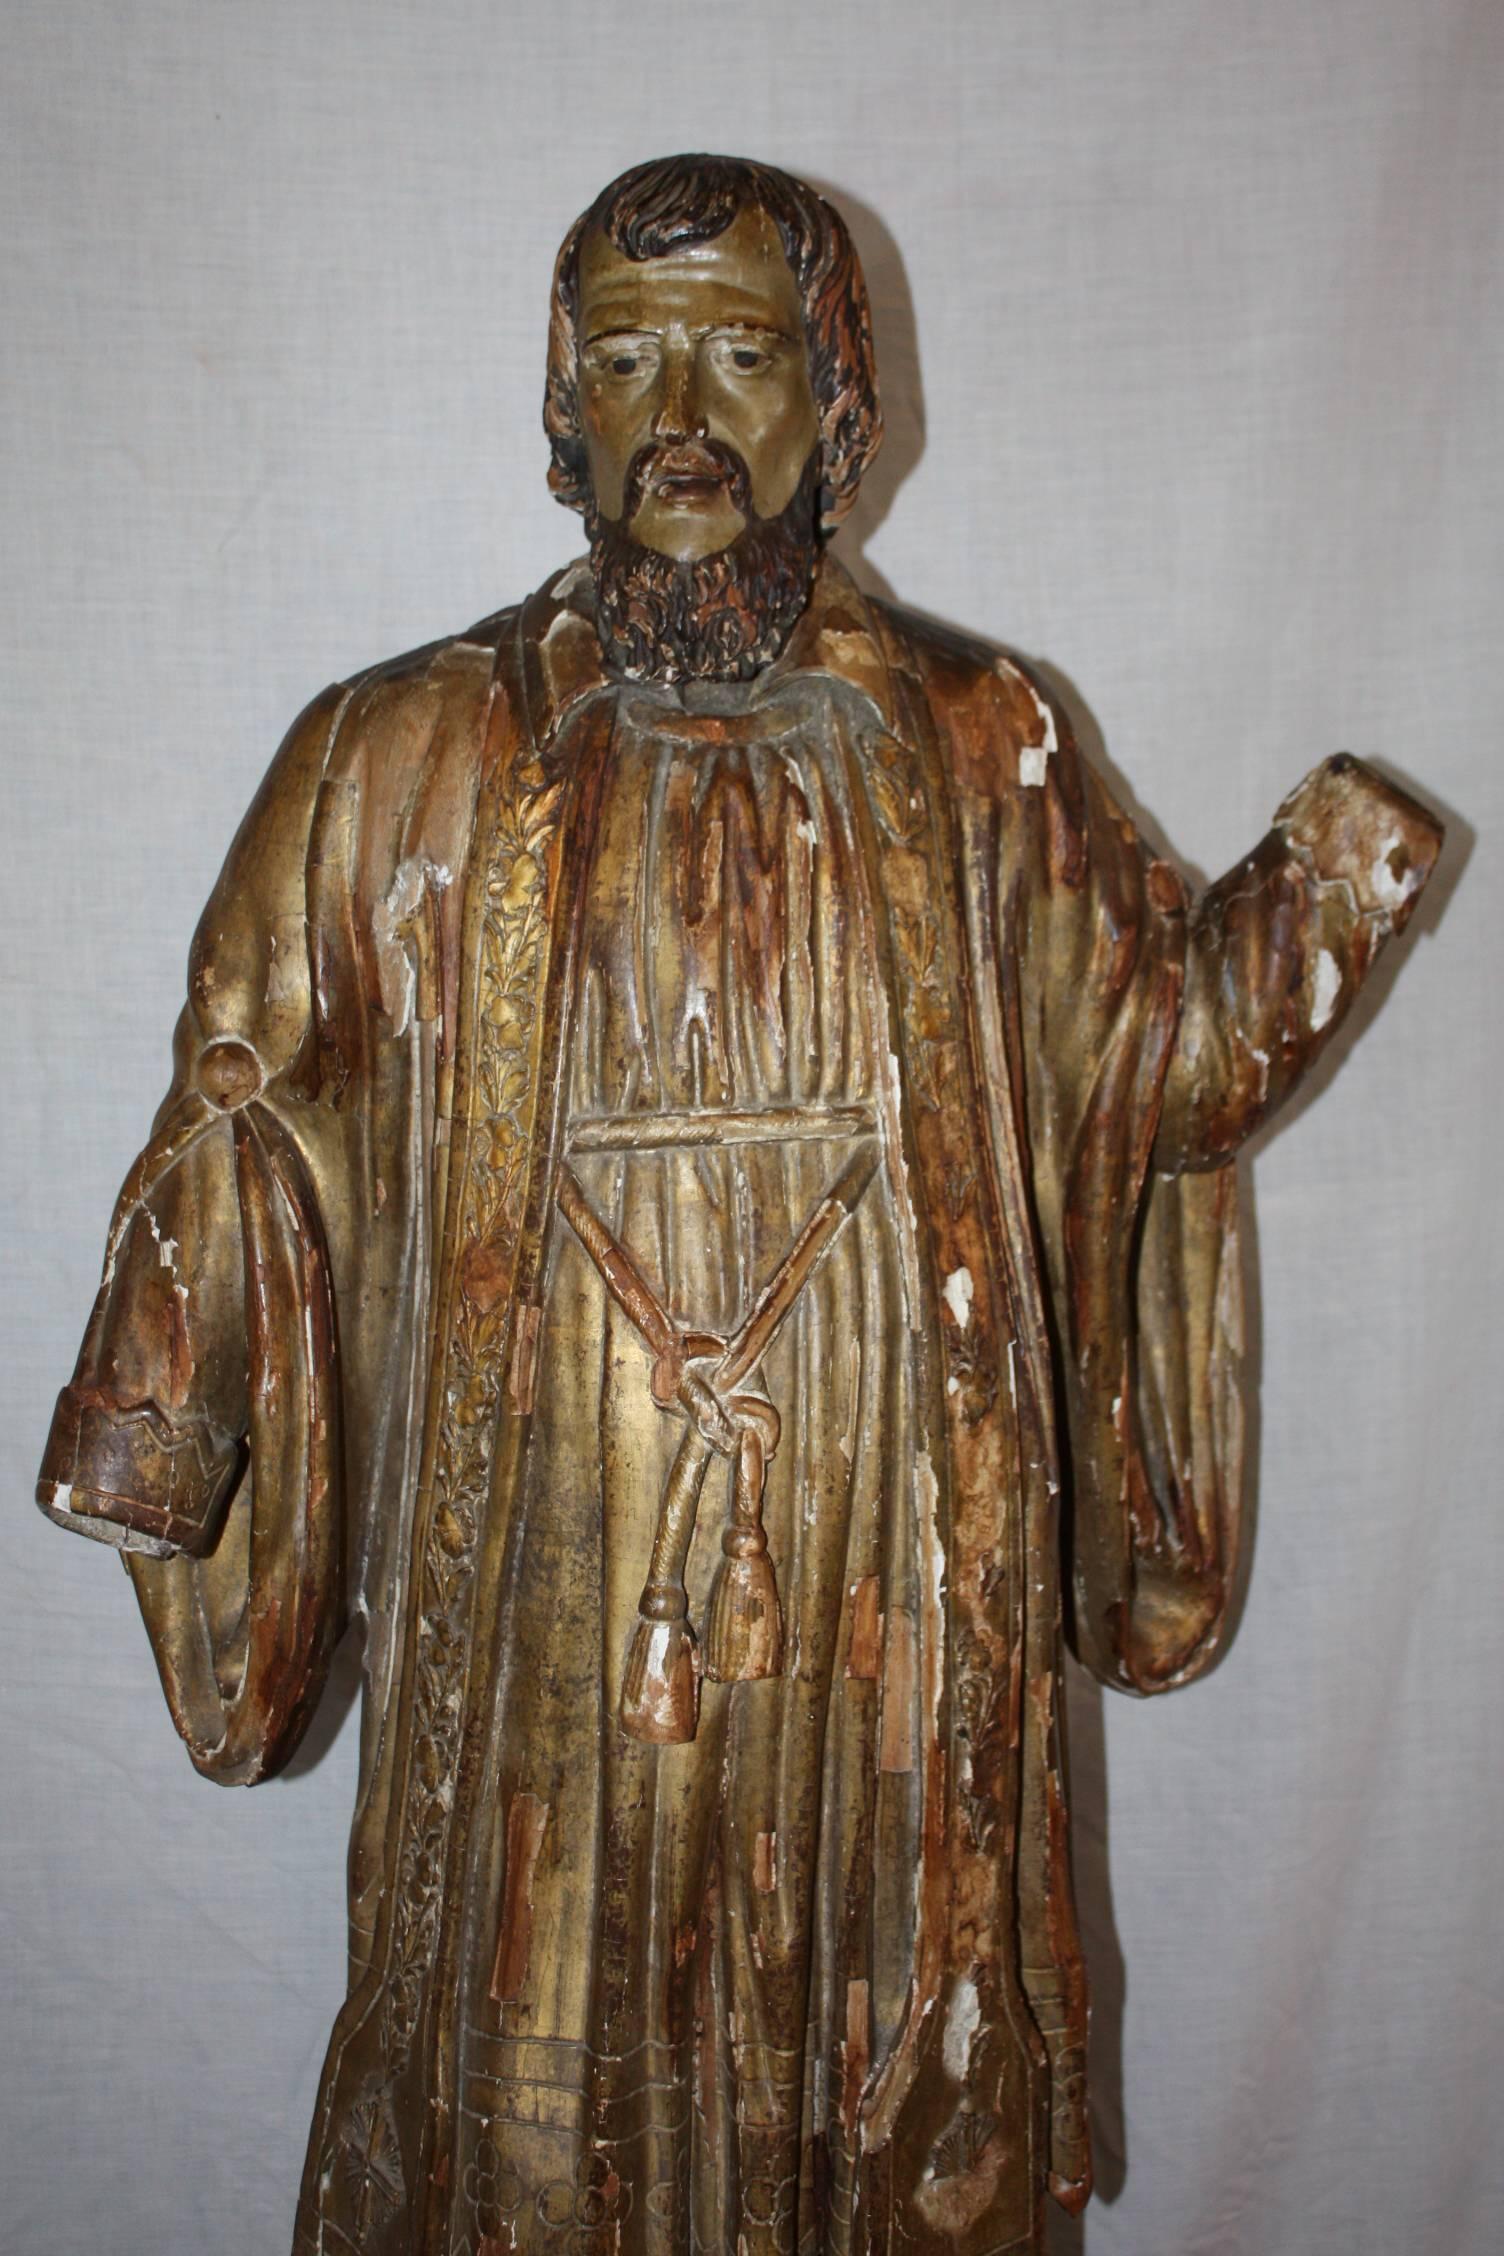 This is a very nice French religious statue that dates to the 1700s. It is a carving of Saint Francis Xavier. The figure is wearing a religious stole. The original wood carving was covered in a gesso plaster and upon the stole had decorative plaster